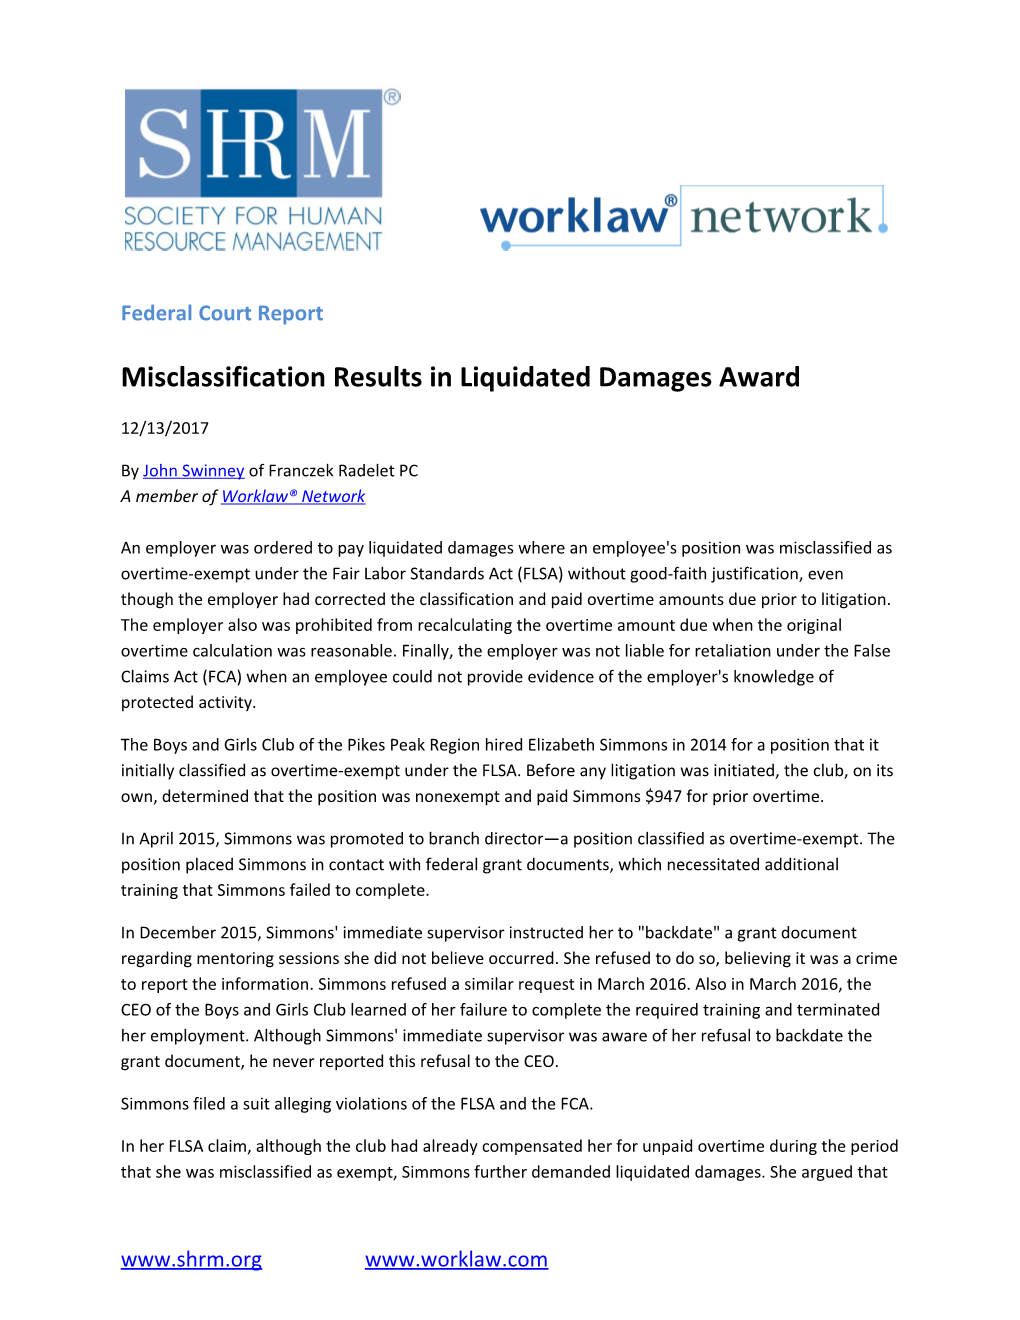 Federal Court Report Misclassification Results in Liquidated Damages Award